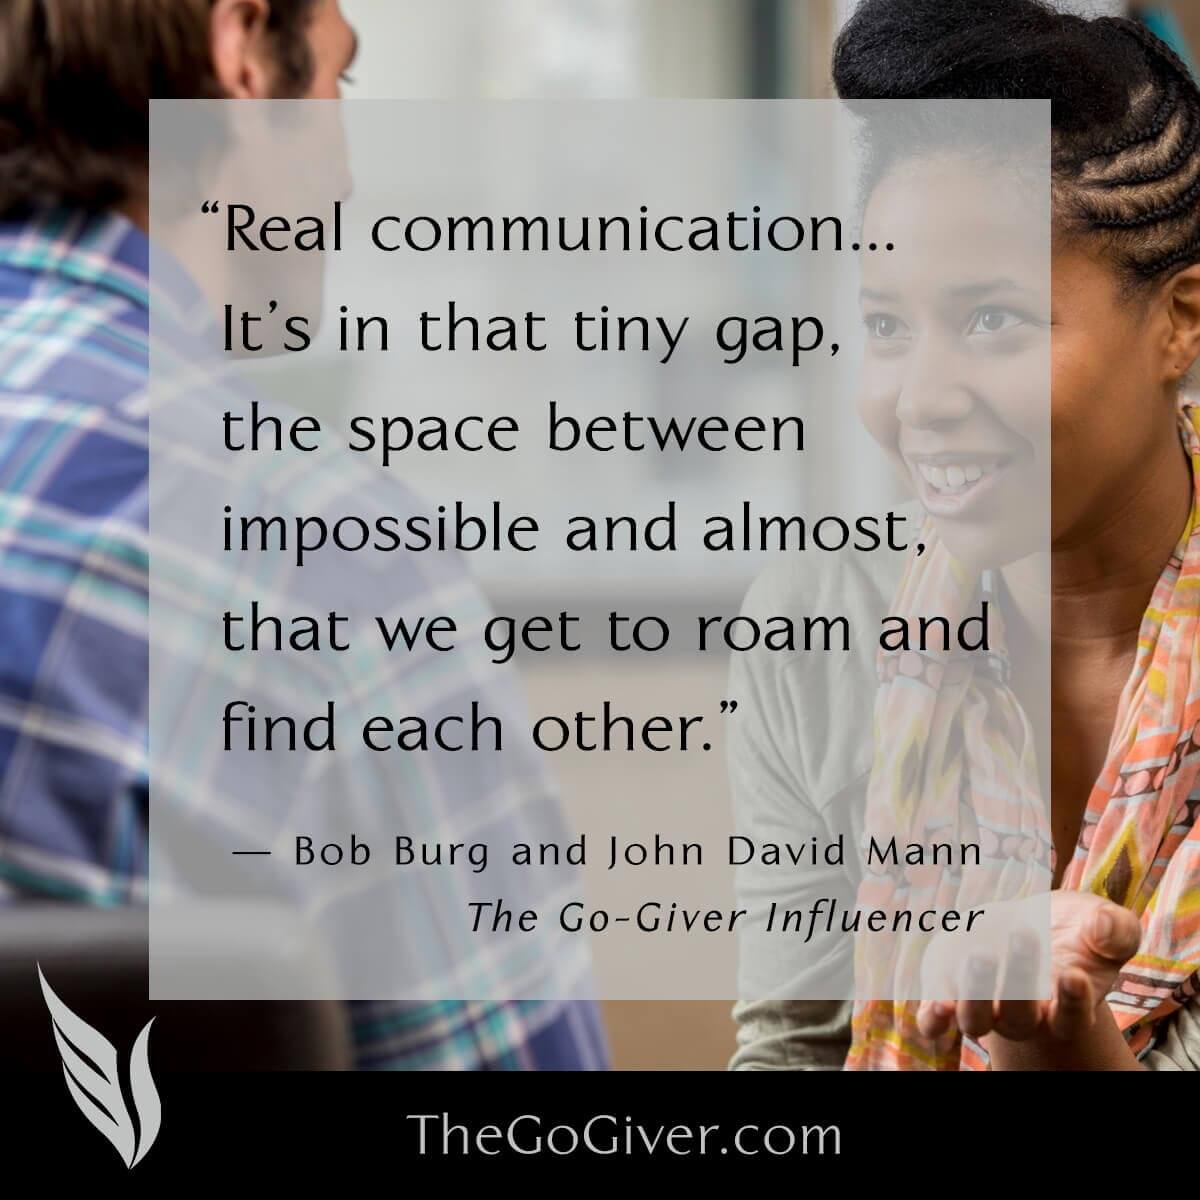 Real communication...it's in that tiny gap, the space between impossible and almost, that we get to roam and find each other. - The Go-Giver Influencer